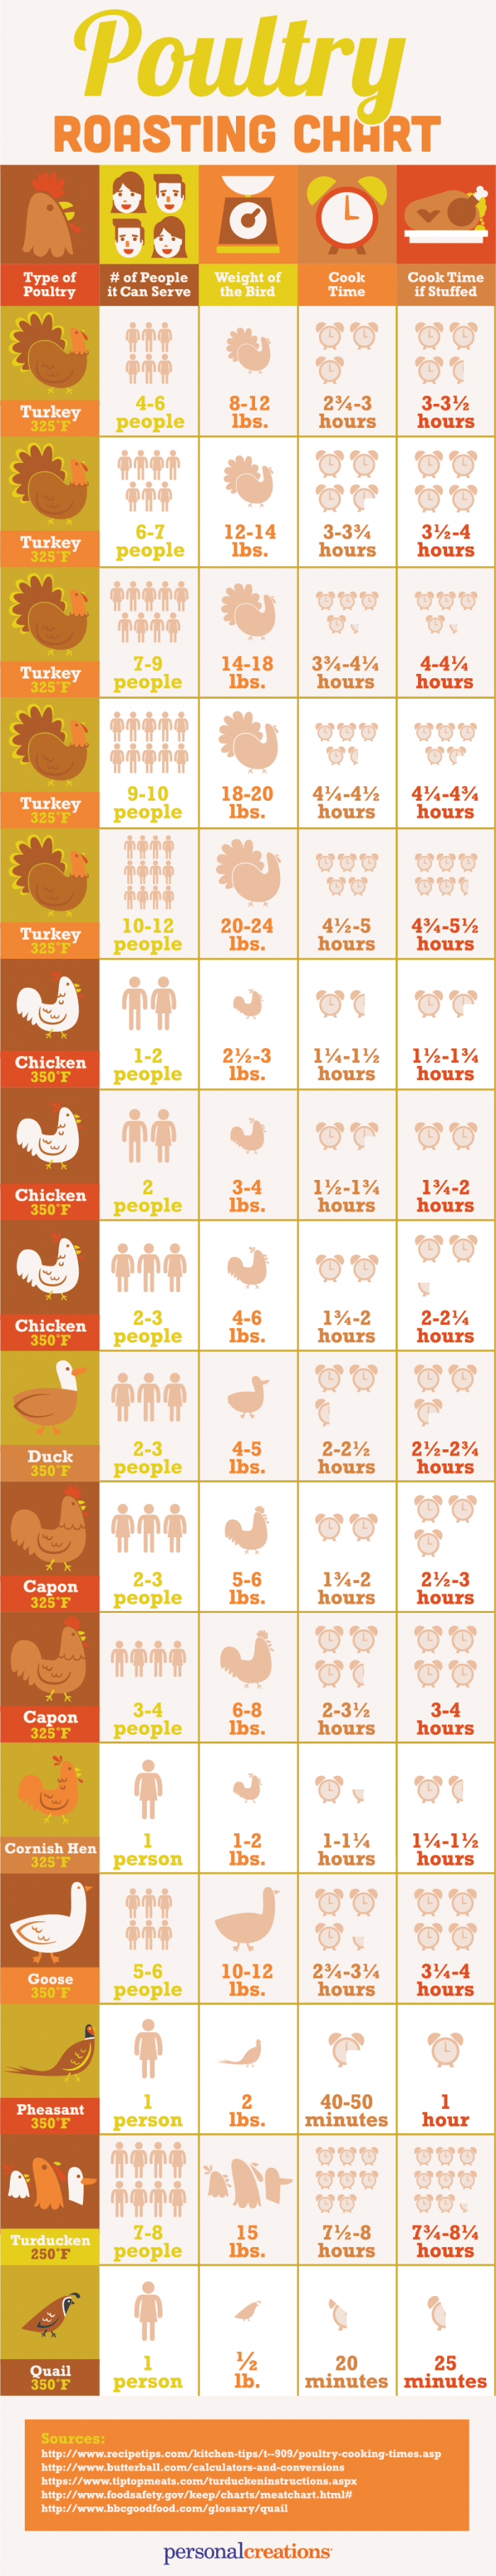 Ultimate Poultry Roasting Guide Infographic